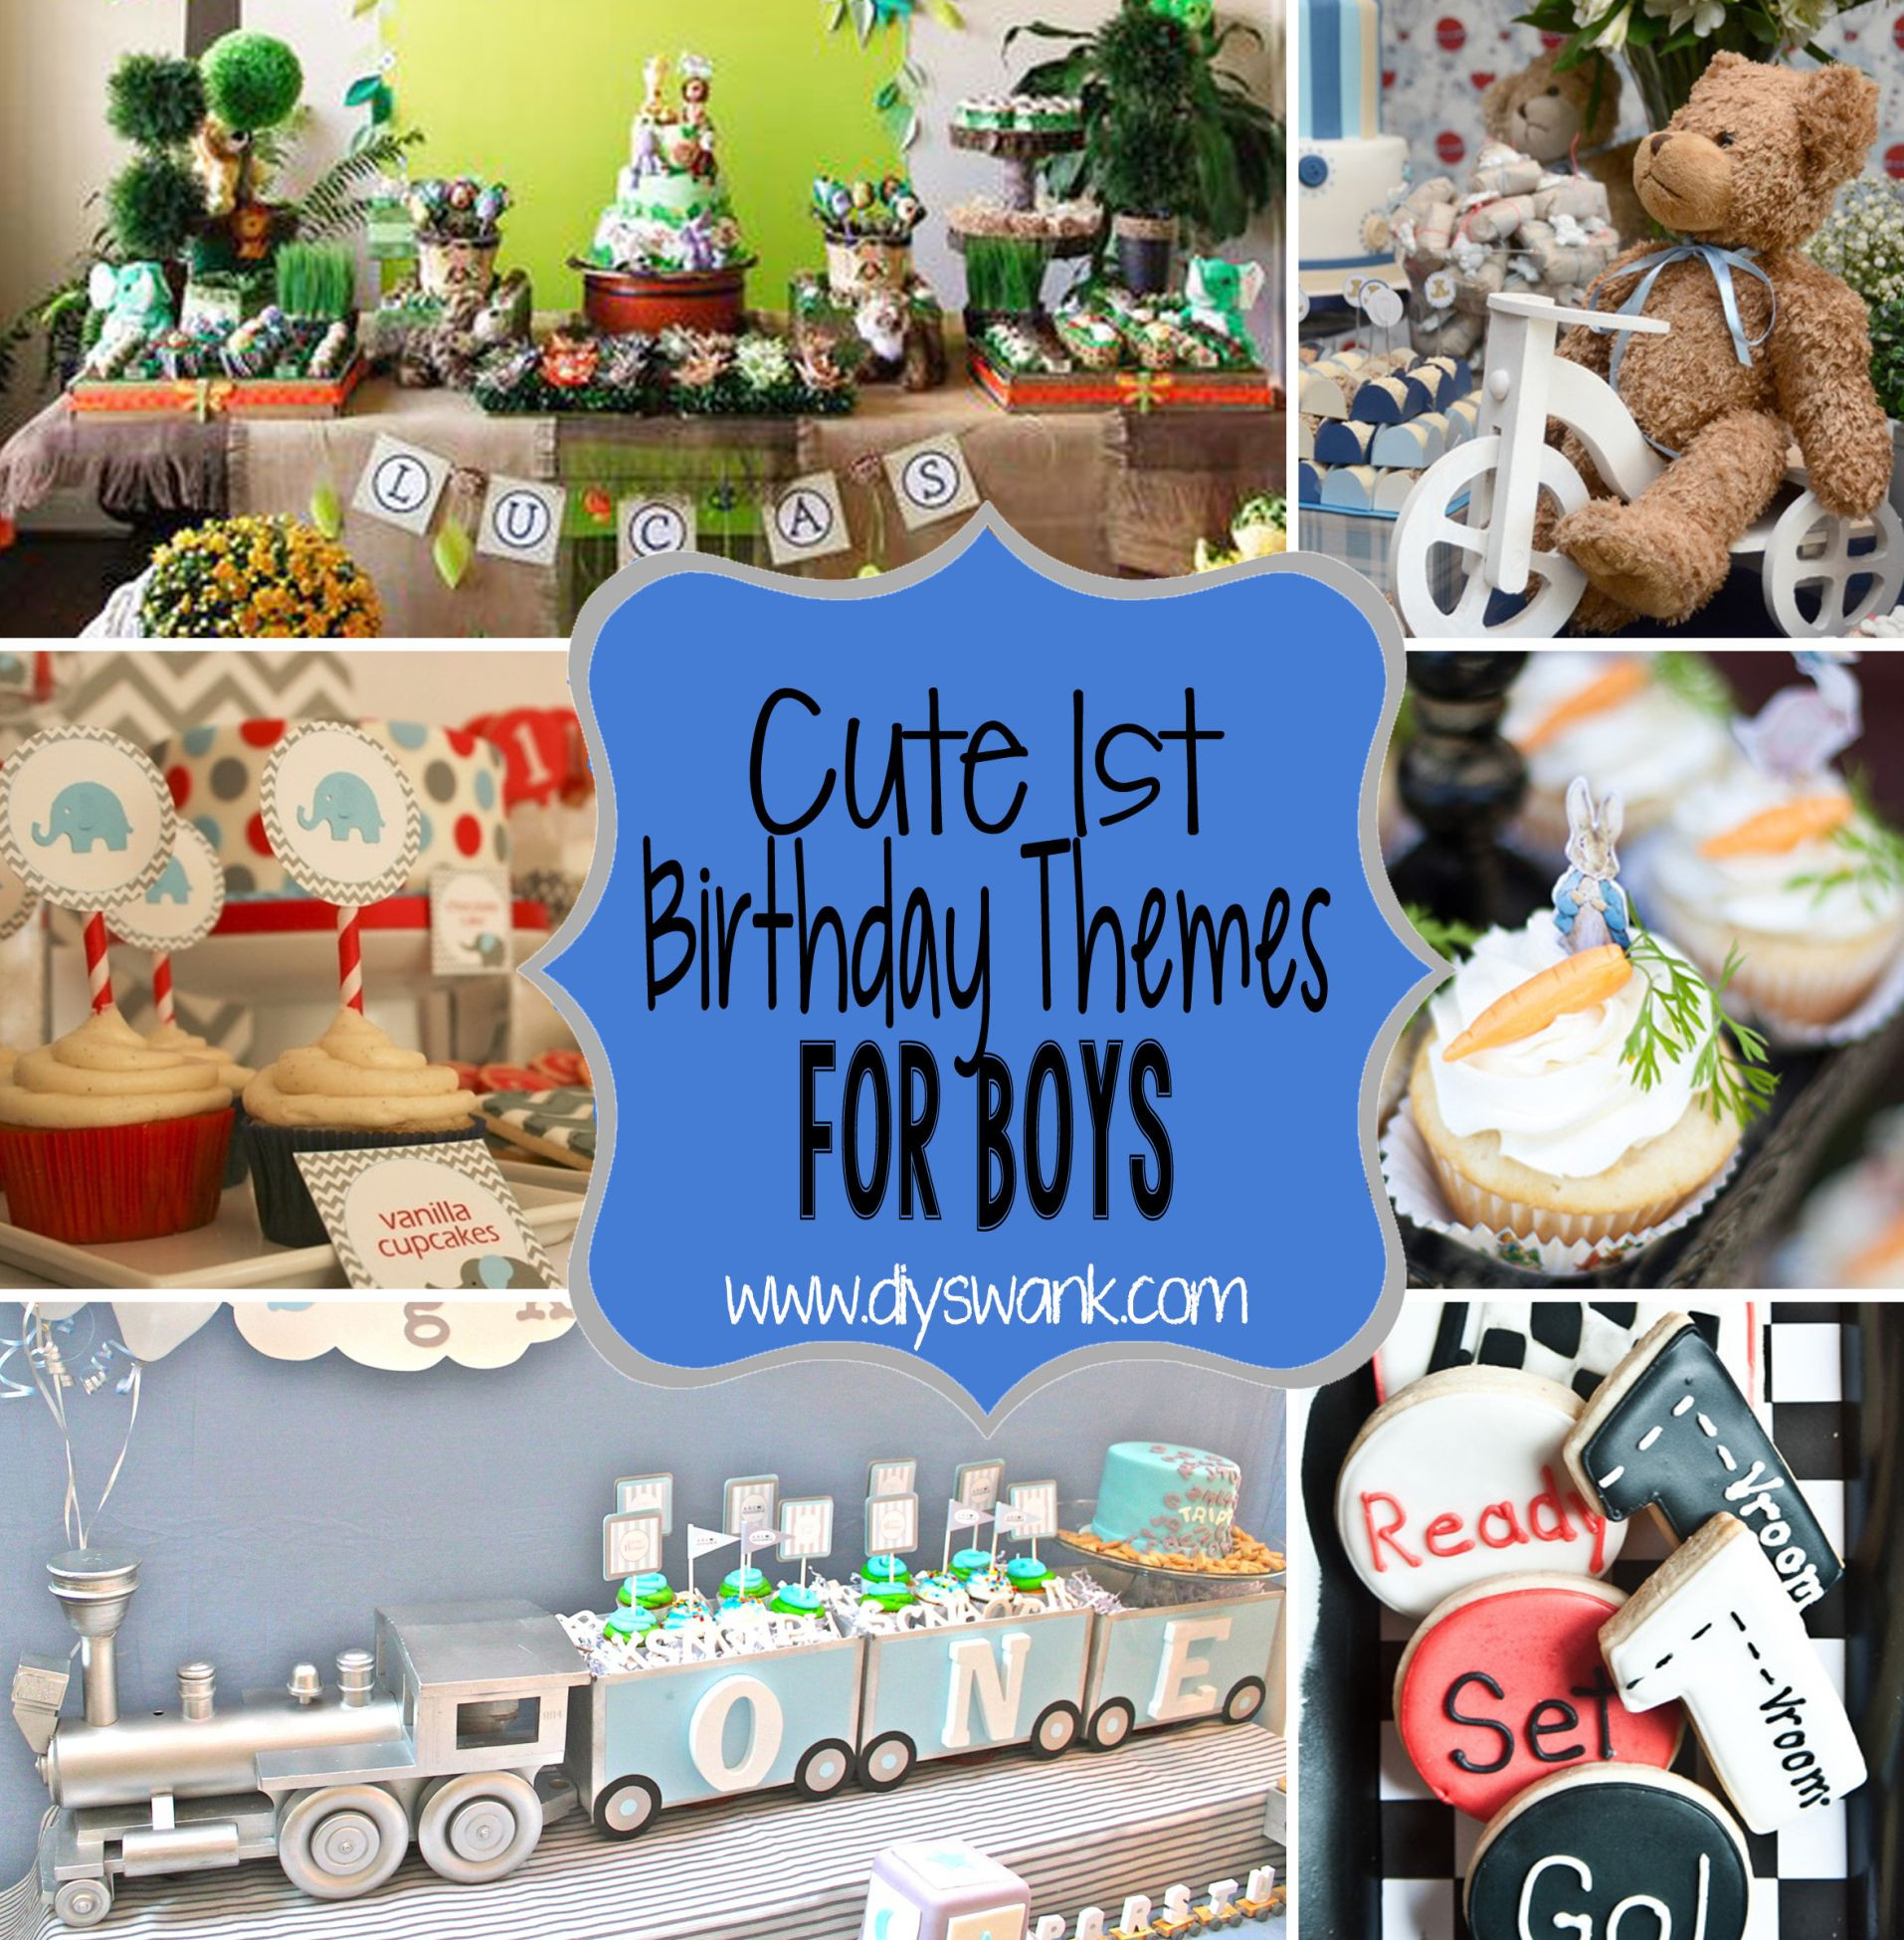 1St Birthday Party Themes For Baby Boy
 Cute Boy 1st Birthday Party Themes